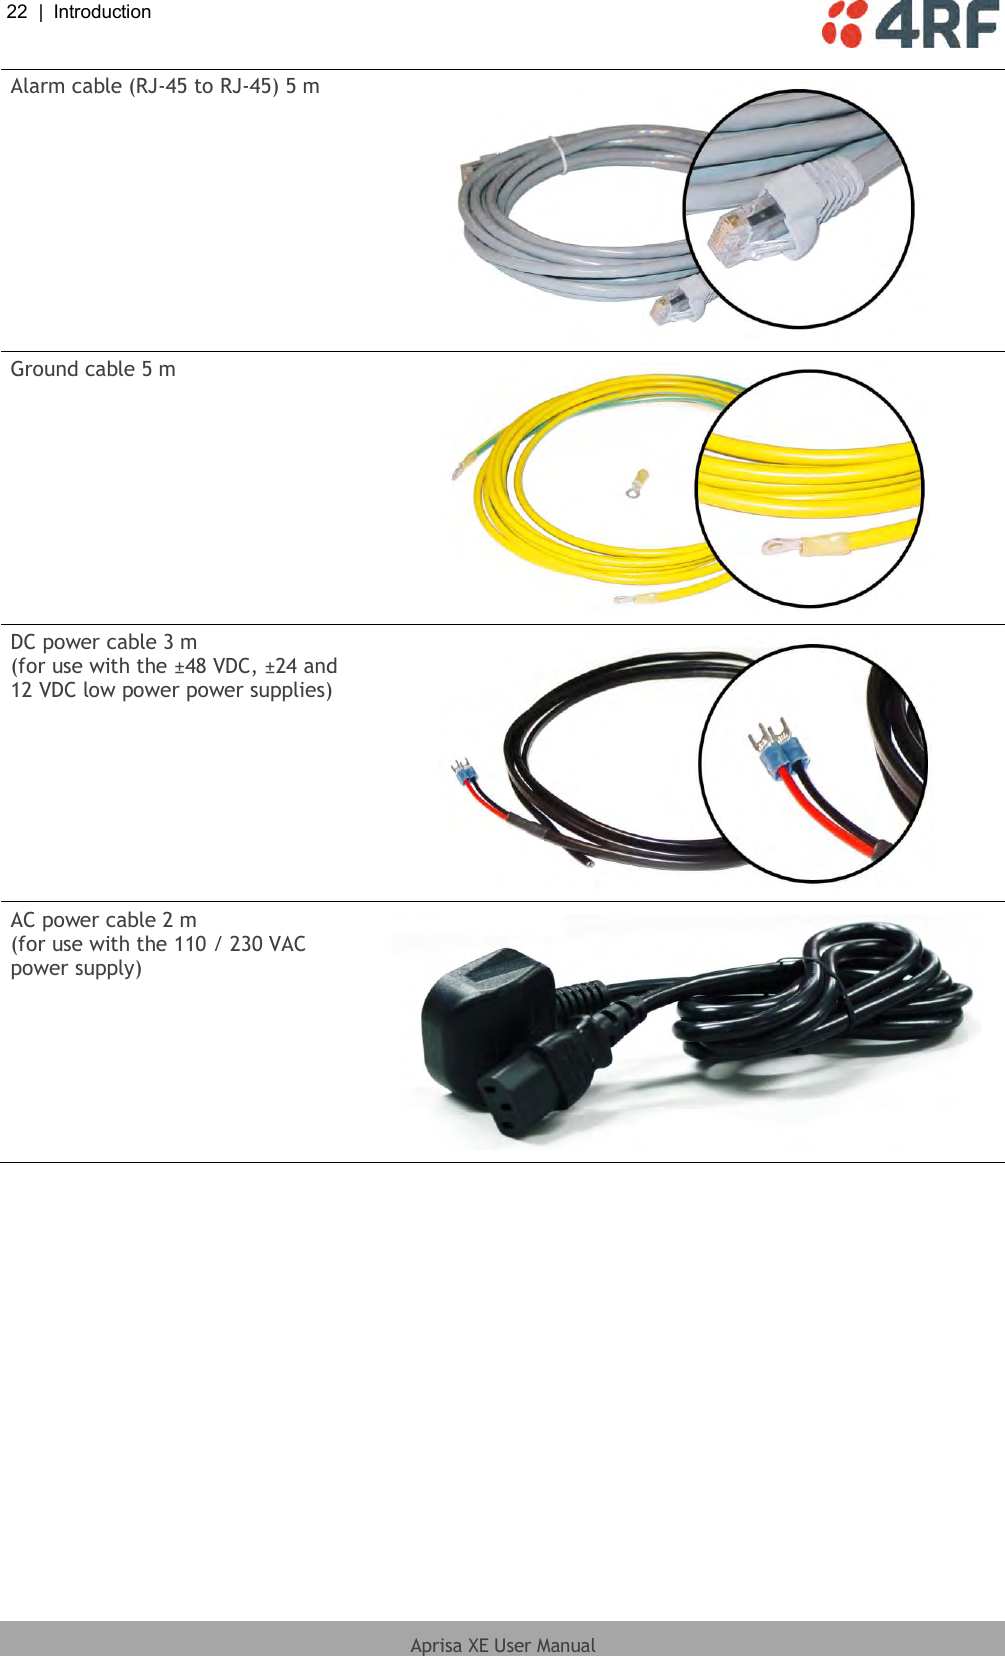 22  |  Introduction   Aprisa XE User Manual  Alarm cable (RJ-45 to RJ-45) 5 m  Ground cable 5 m  DC power cable 3 m (for use with the ±48 VDC, ±24 and 12 VDC low power power supplies)  AC power cable 2 m (for use with the 110 / 230 VAC power supply)   